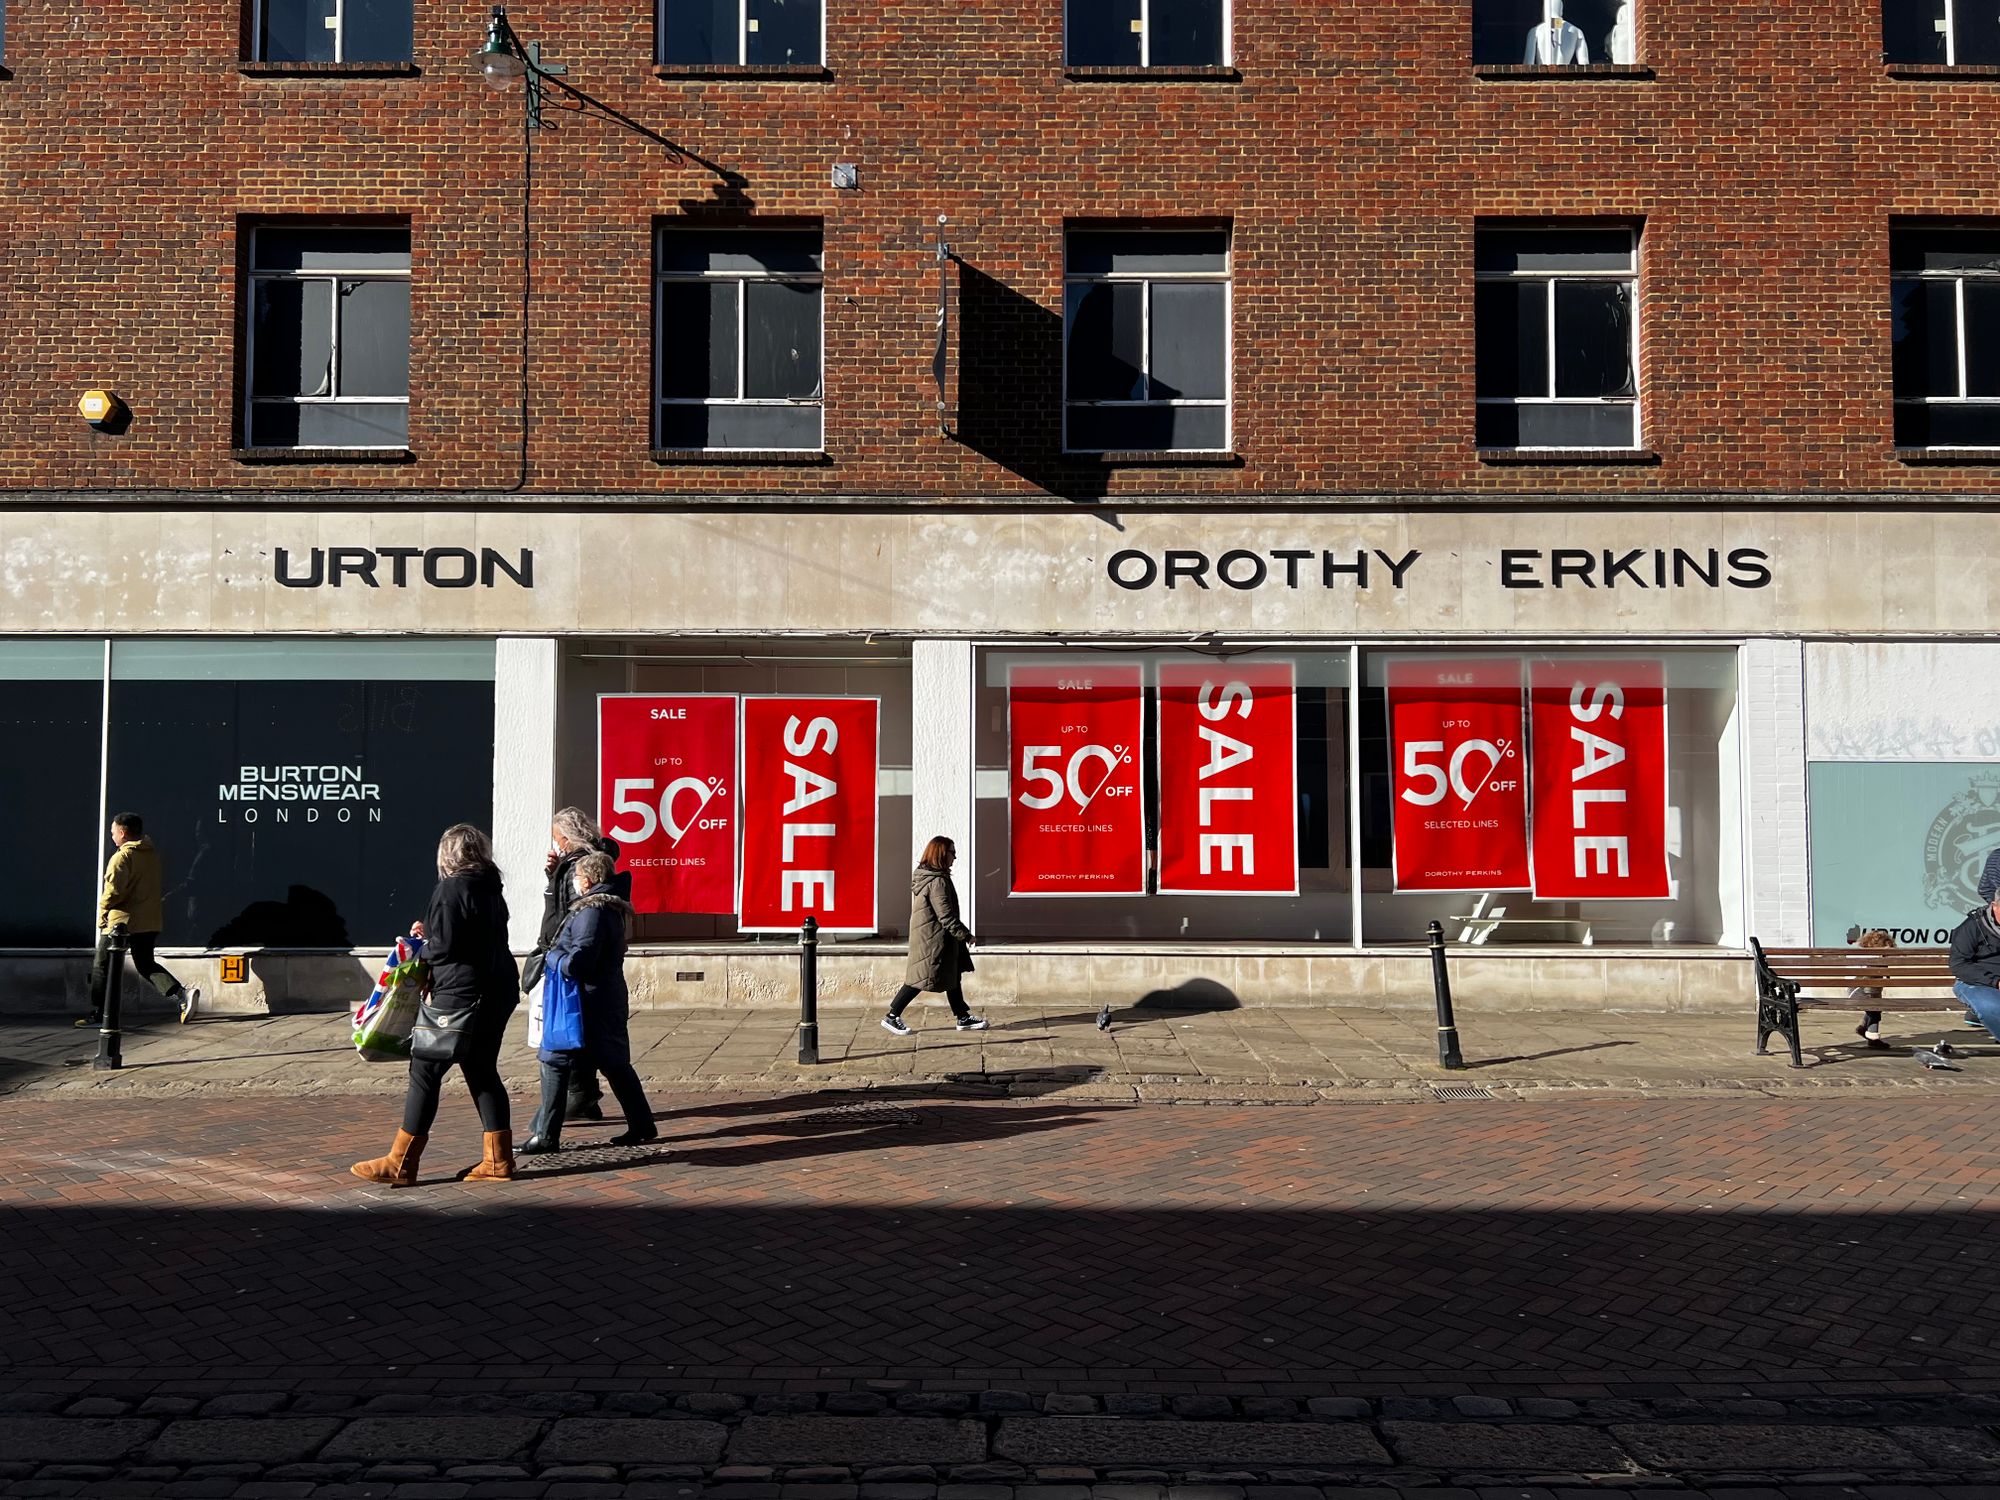 A closed down shop, sale posters still visible in the windows and letters missing from the signage that now reads URTON OROTHY ERKINS.